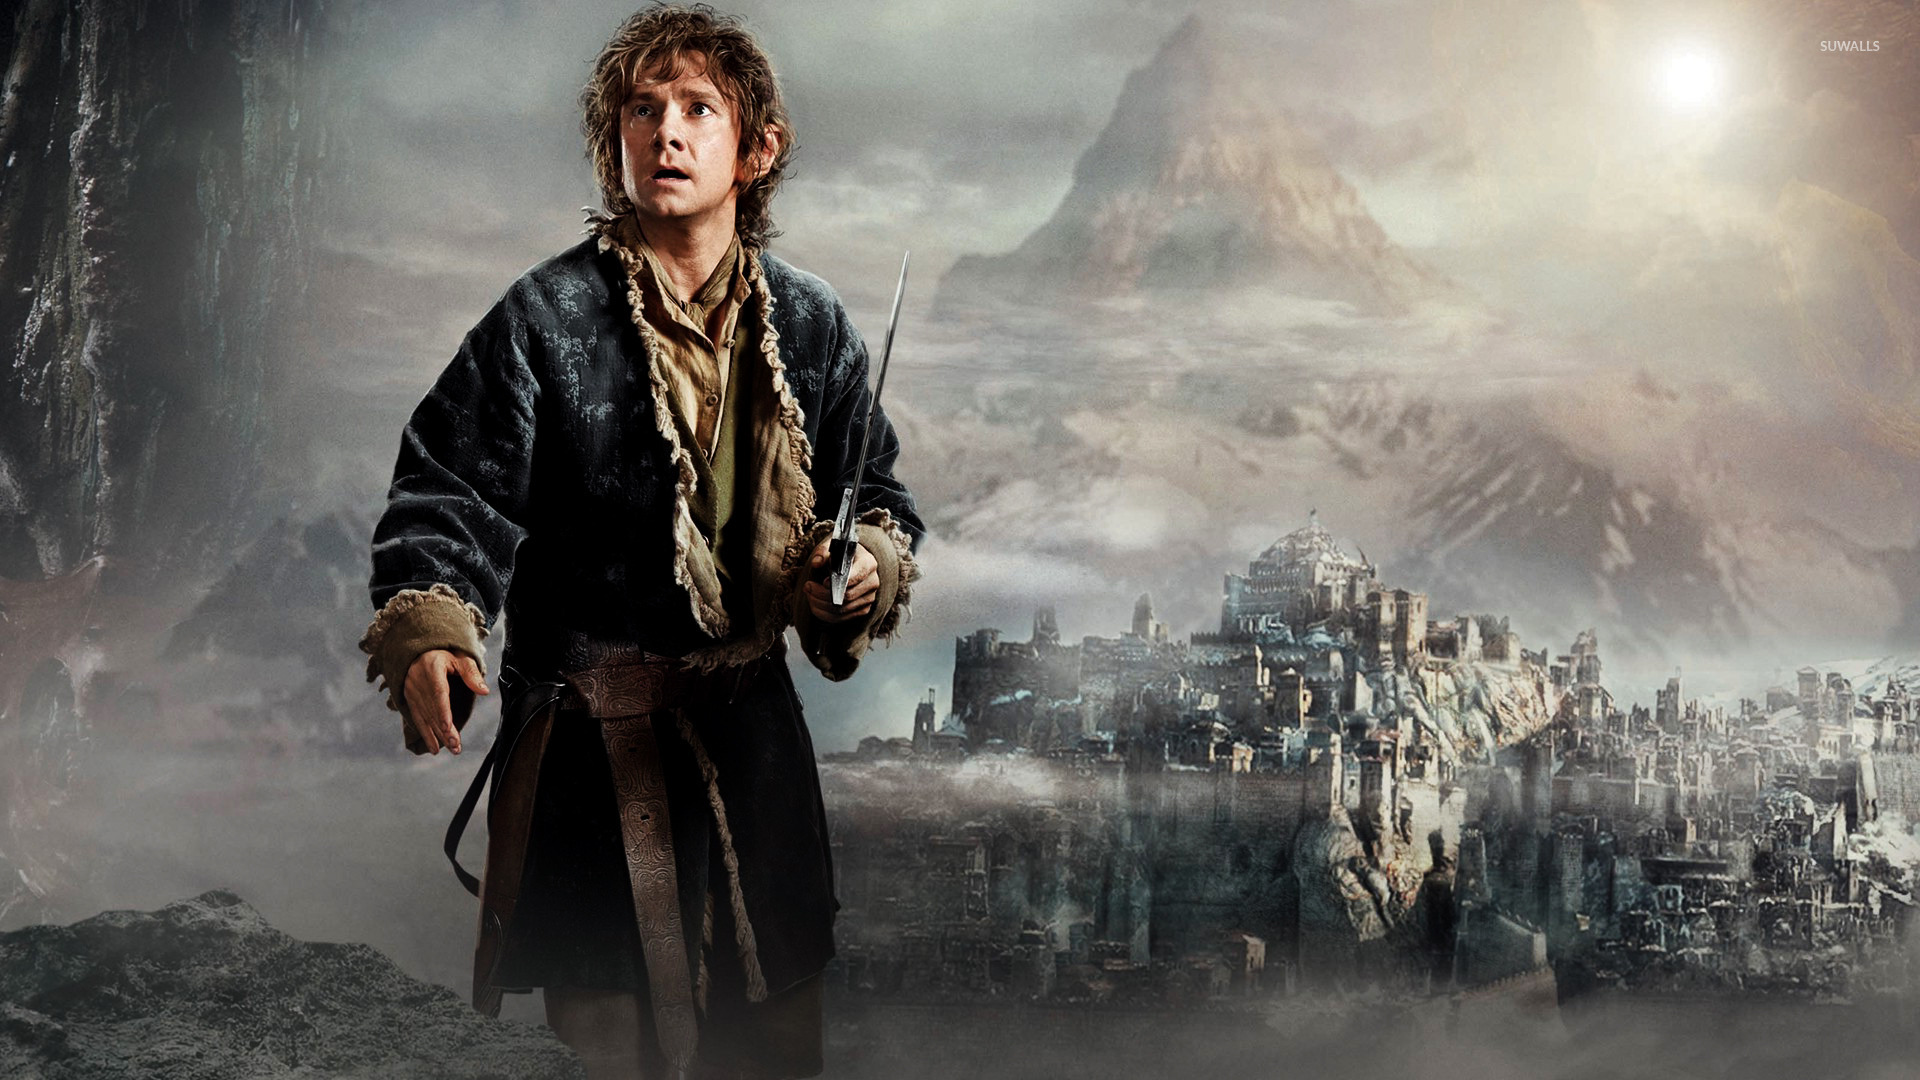 download the last version for android The Hobbit: The Desolation of Smaug